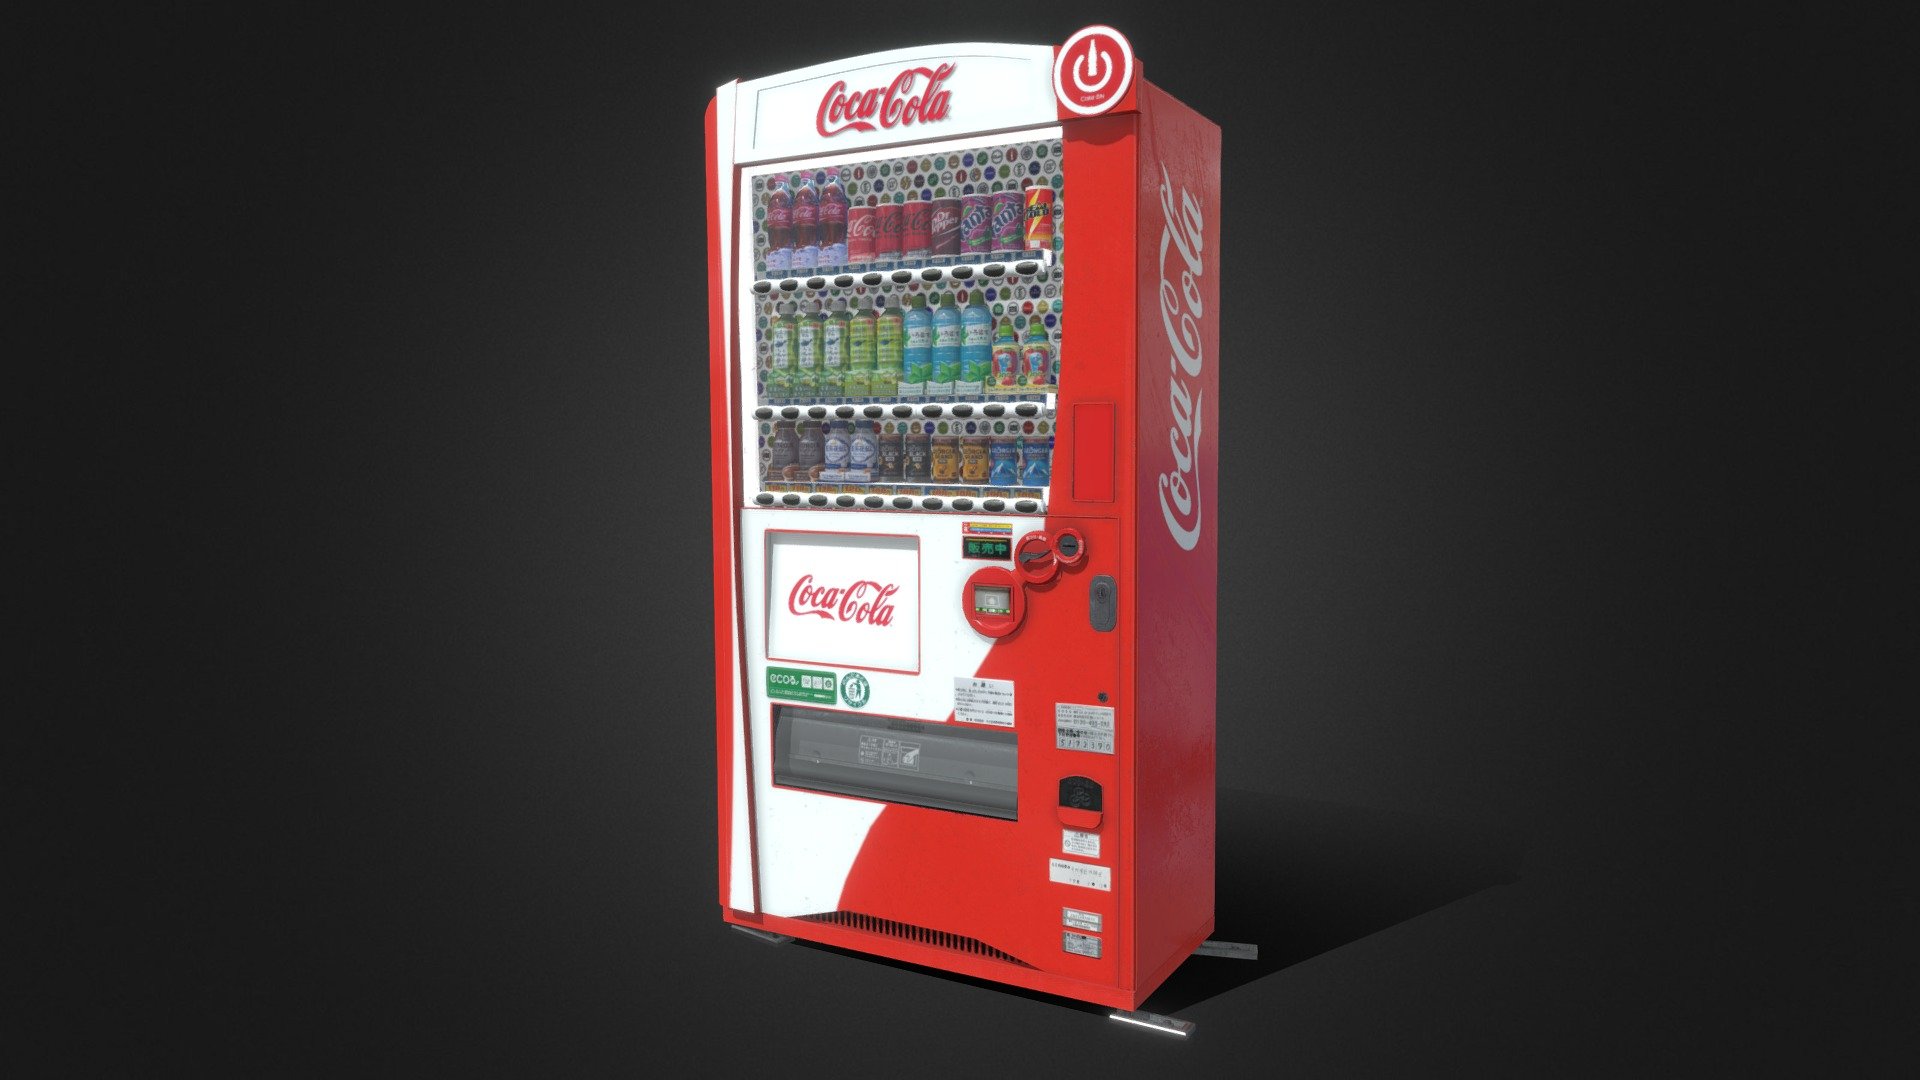 An improved version of the japanese vending machine i modeled a while ago, this time coca cola branded with less polygons. 

2 Materials, one for the machine and one for the drinks. 4k resolution textures 3d model